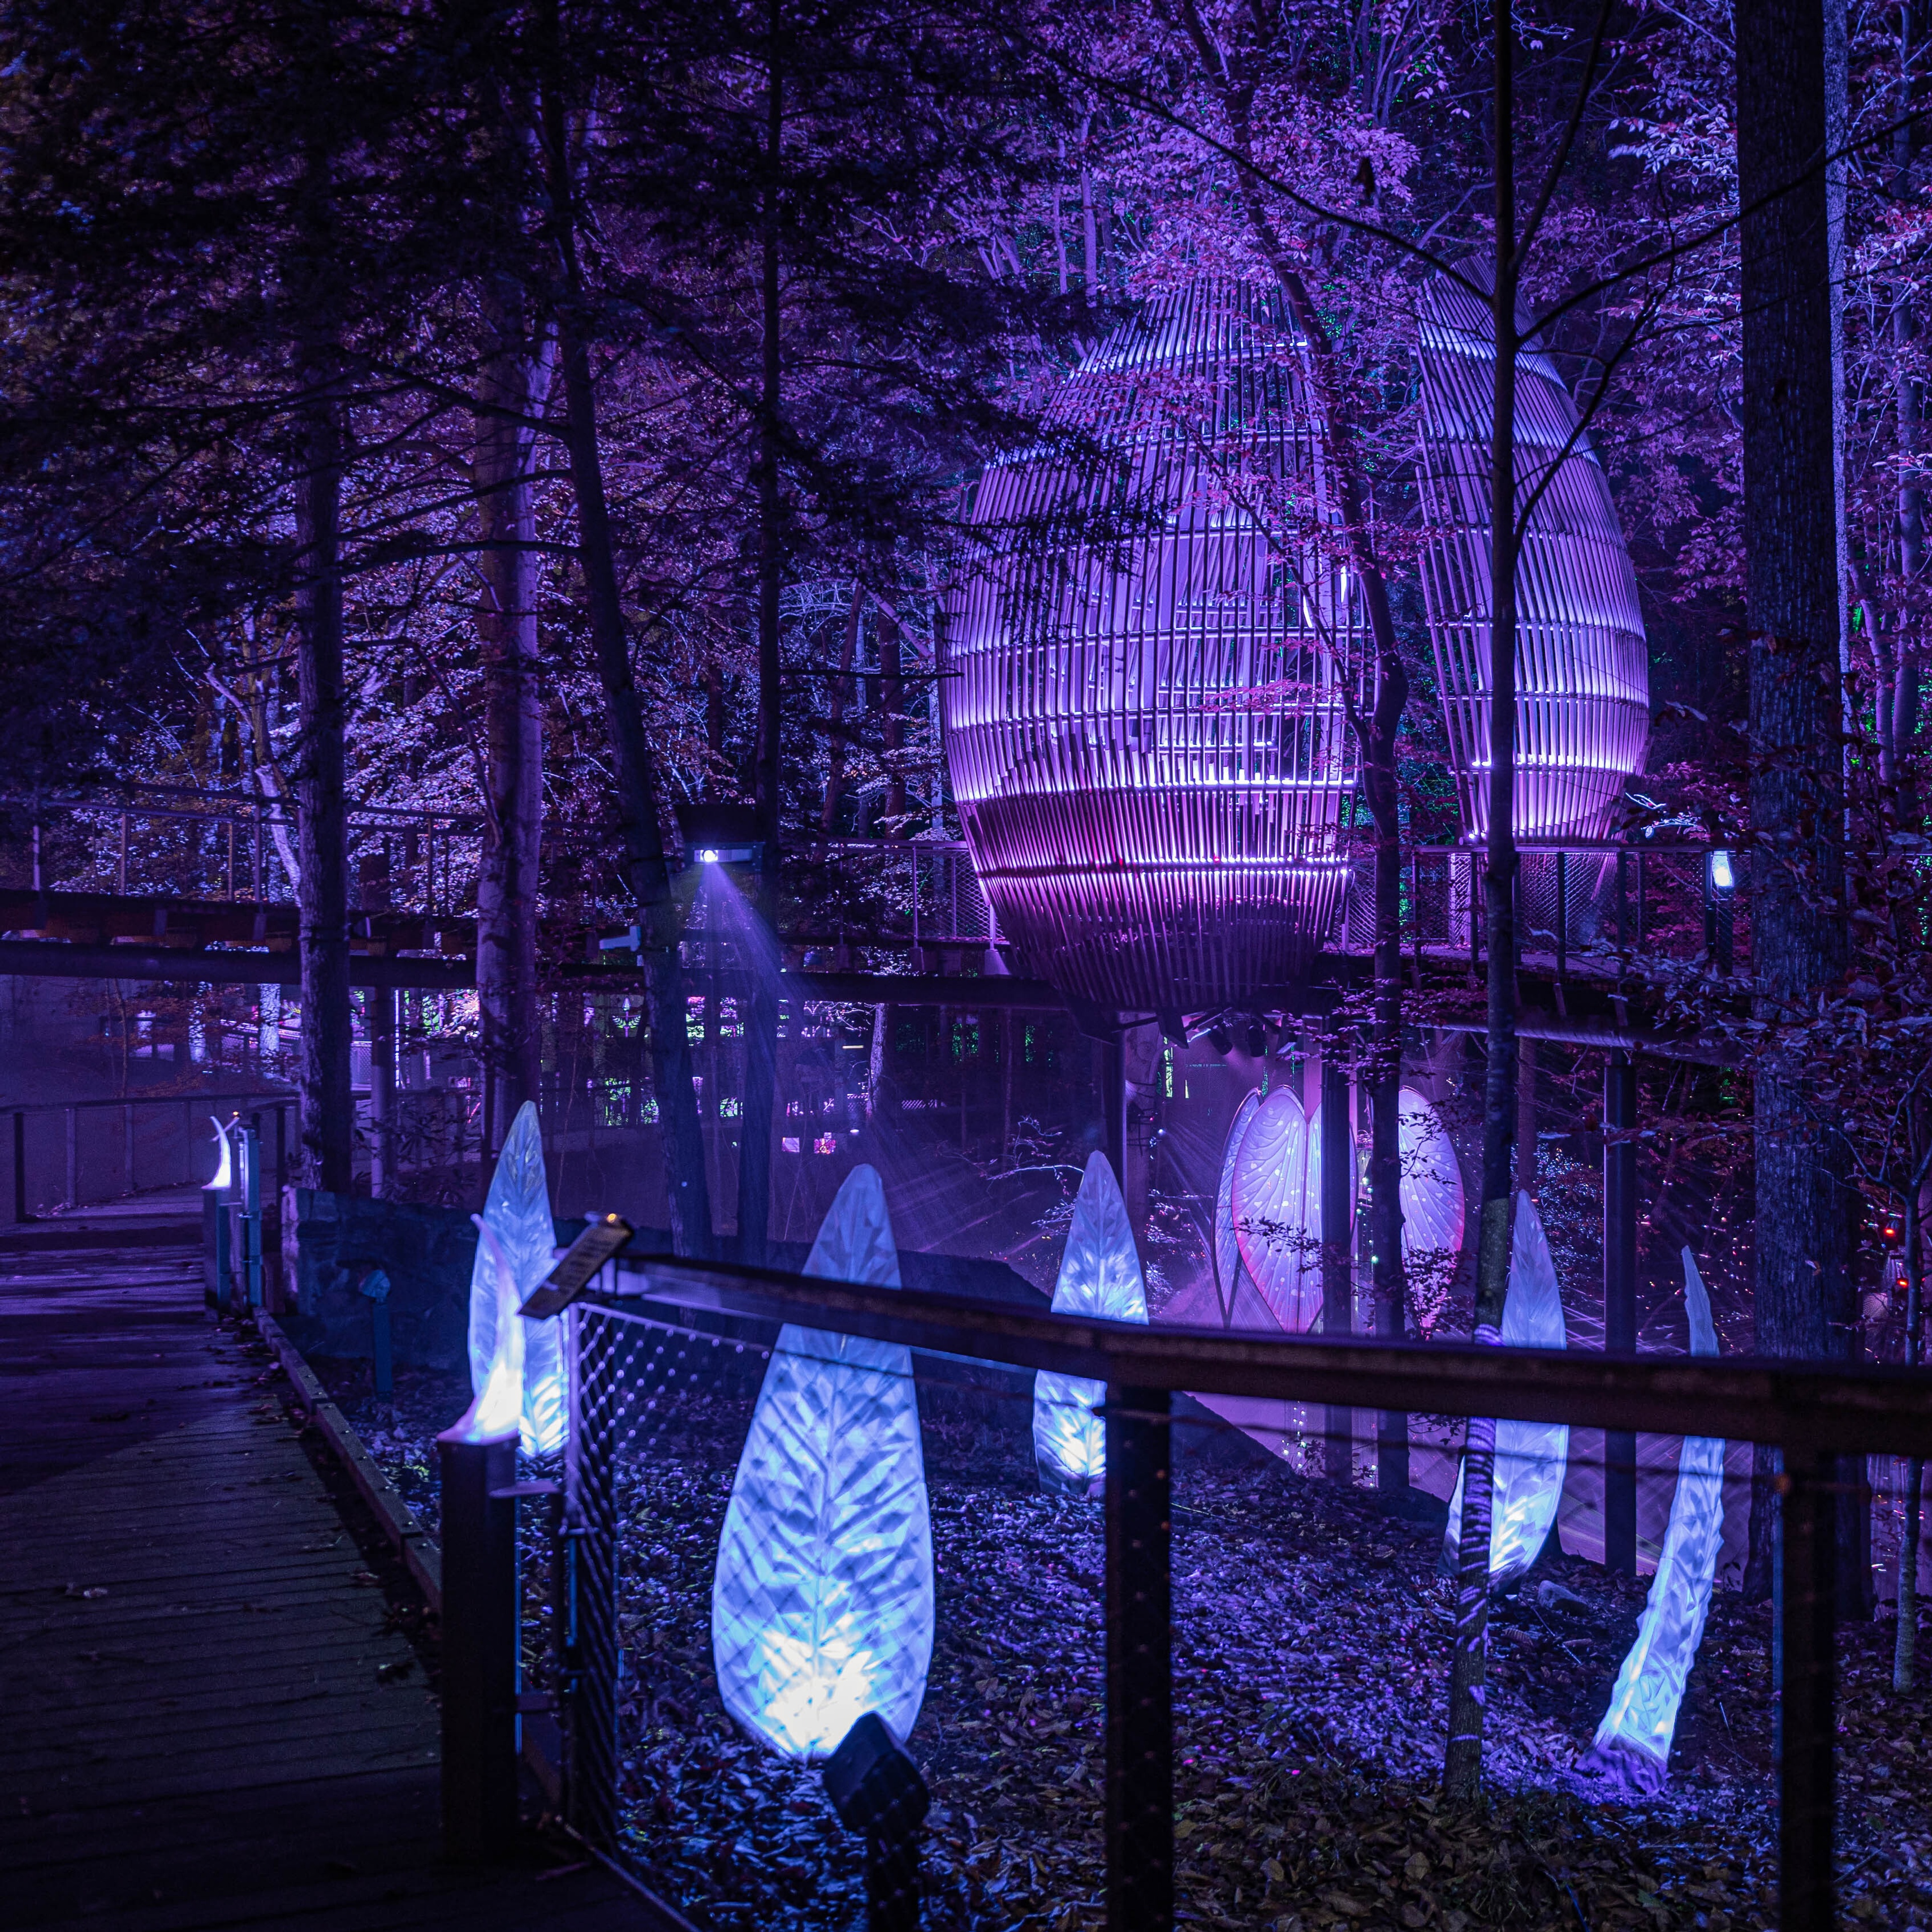 Nighttime view of walkway through a forest. The forest is illuminated with purple and deep blue lights and is decorated by glowing leaf sculptures.